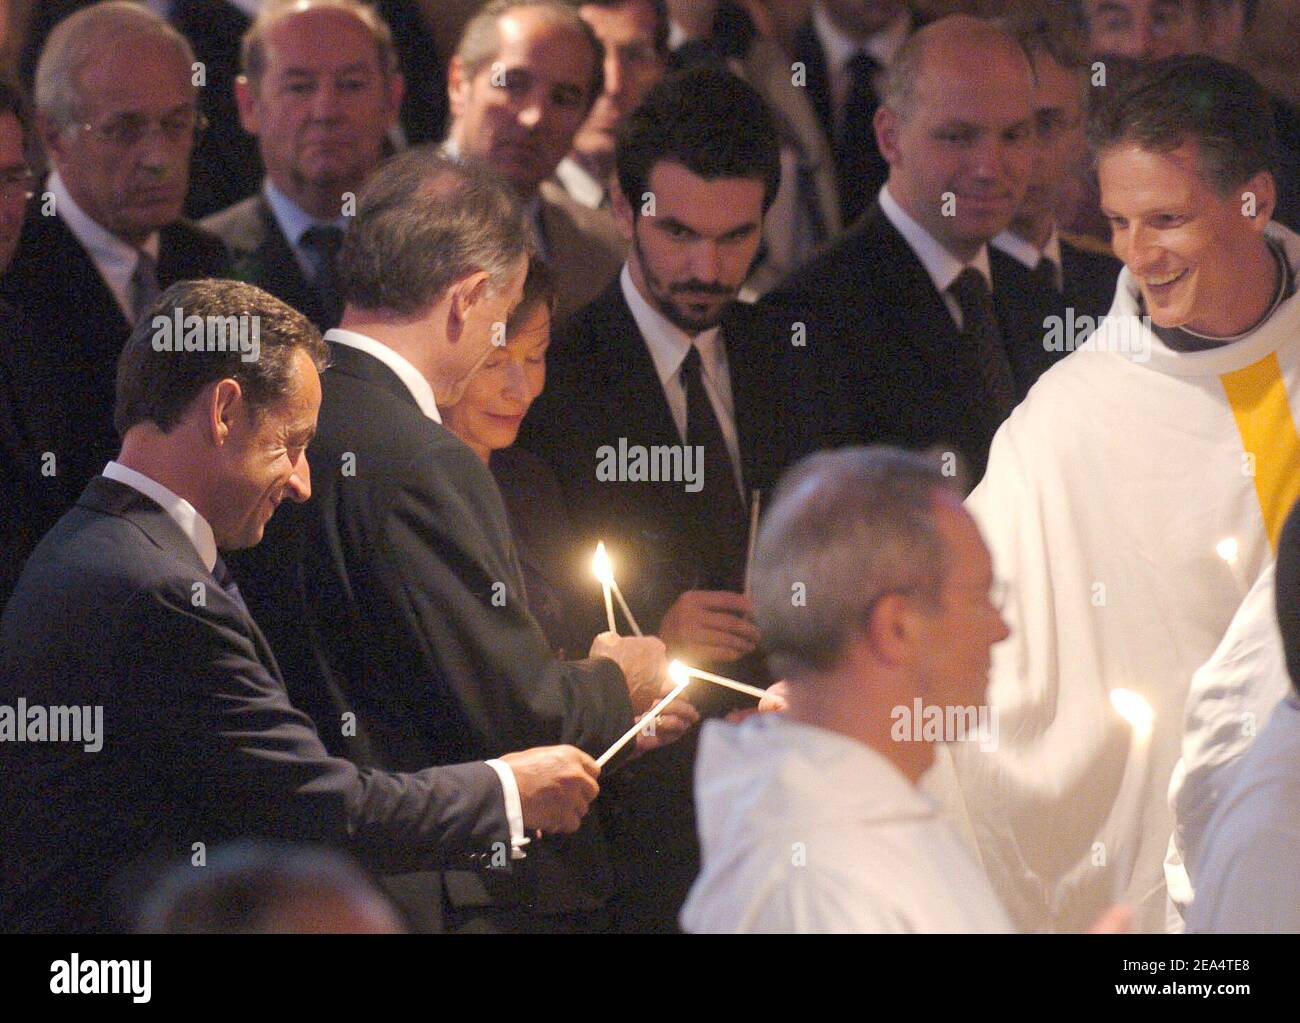 French Interior Minister Nicolas Sarkozy, German President Horst Koehler and his wife Eva attend the funeral of Brother Roger Schutz, the leader of the Taize ecumenical community, held at the community's Reconciliation church in Taize, central France, on August 23, 2005. Brother Roger, 90, was slain last week when a 36-year-old mentally disturbed Romanian woman slit his throat in front of 2,500 pilgrims praying at the church. Photo by Bruno Klein/ABACAPRESS.COM Stock Photo